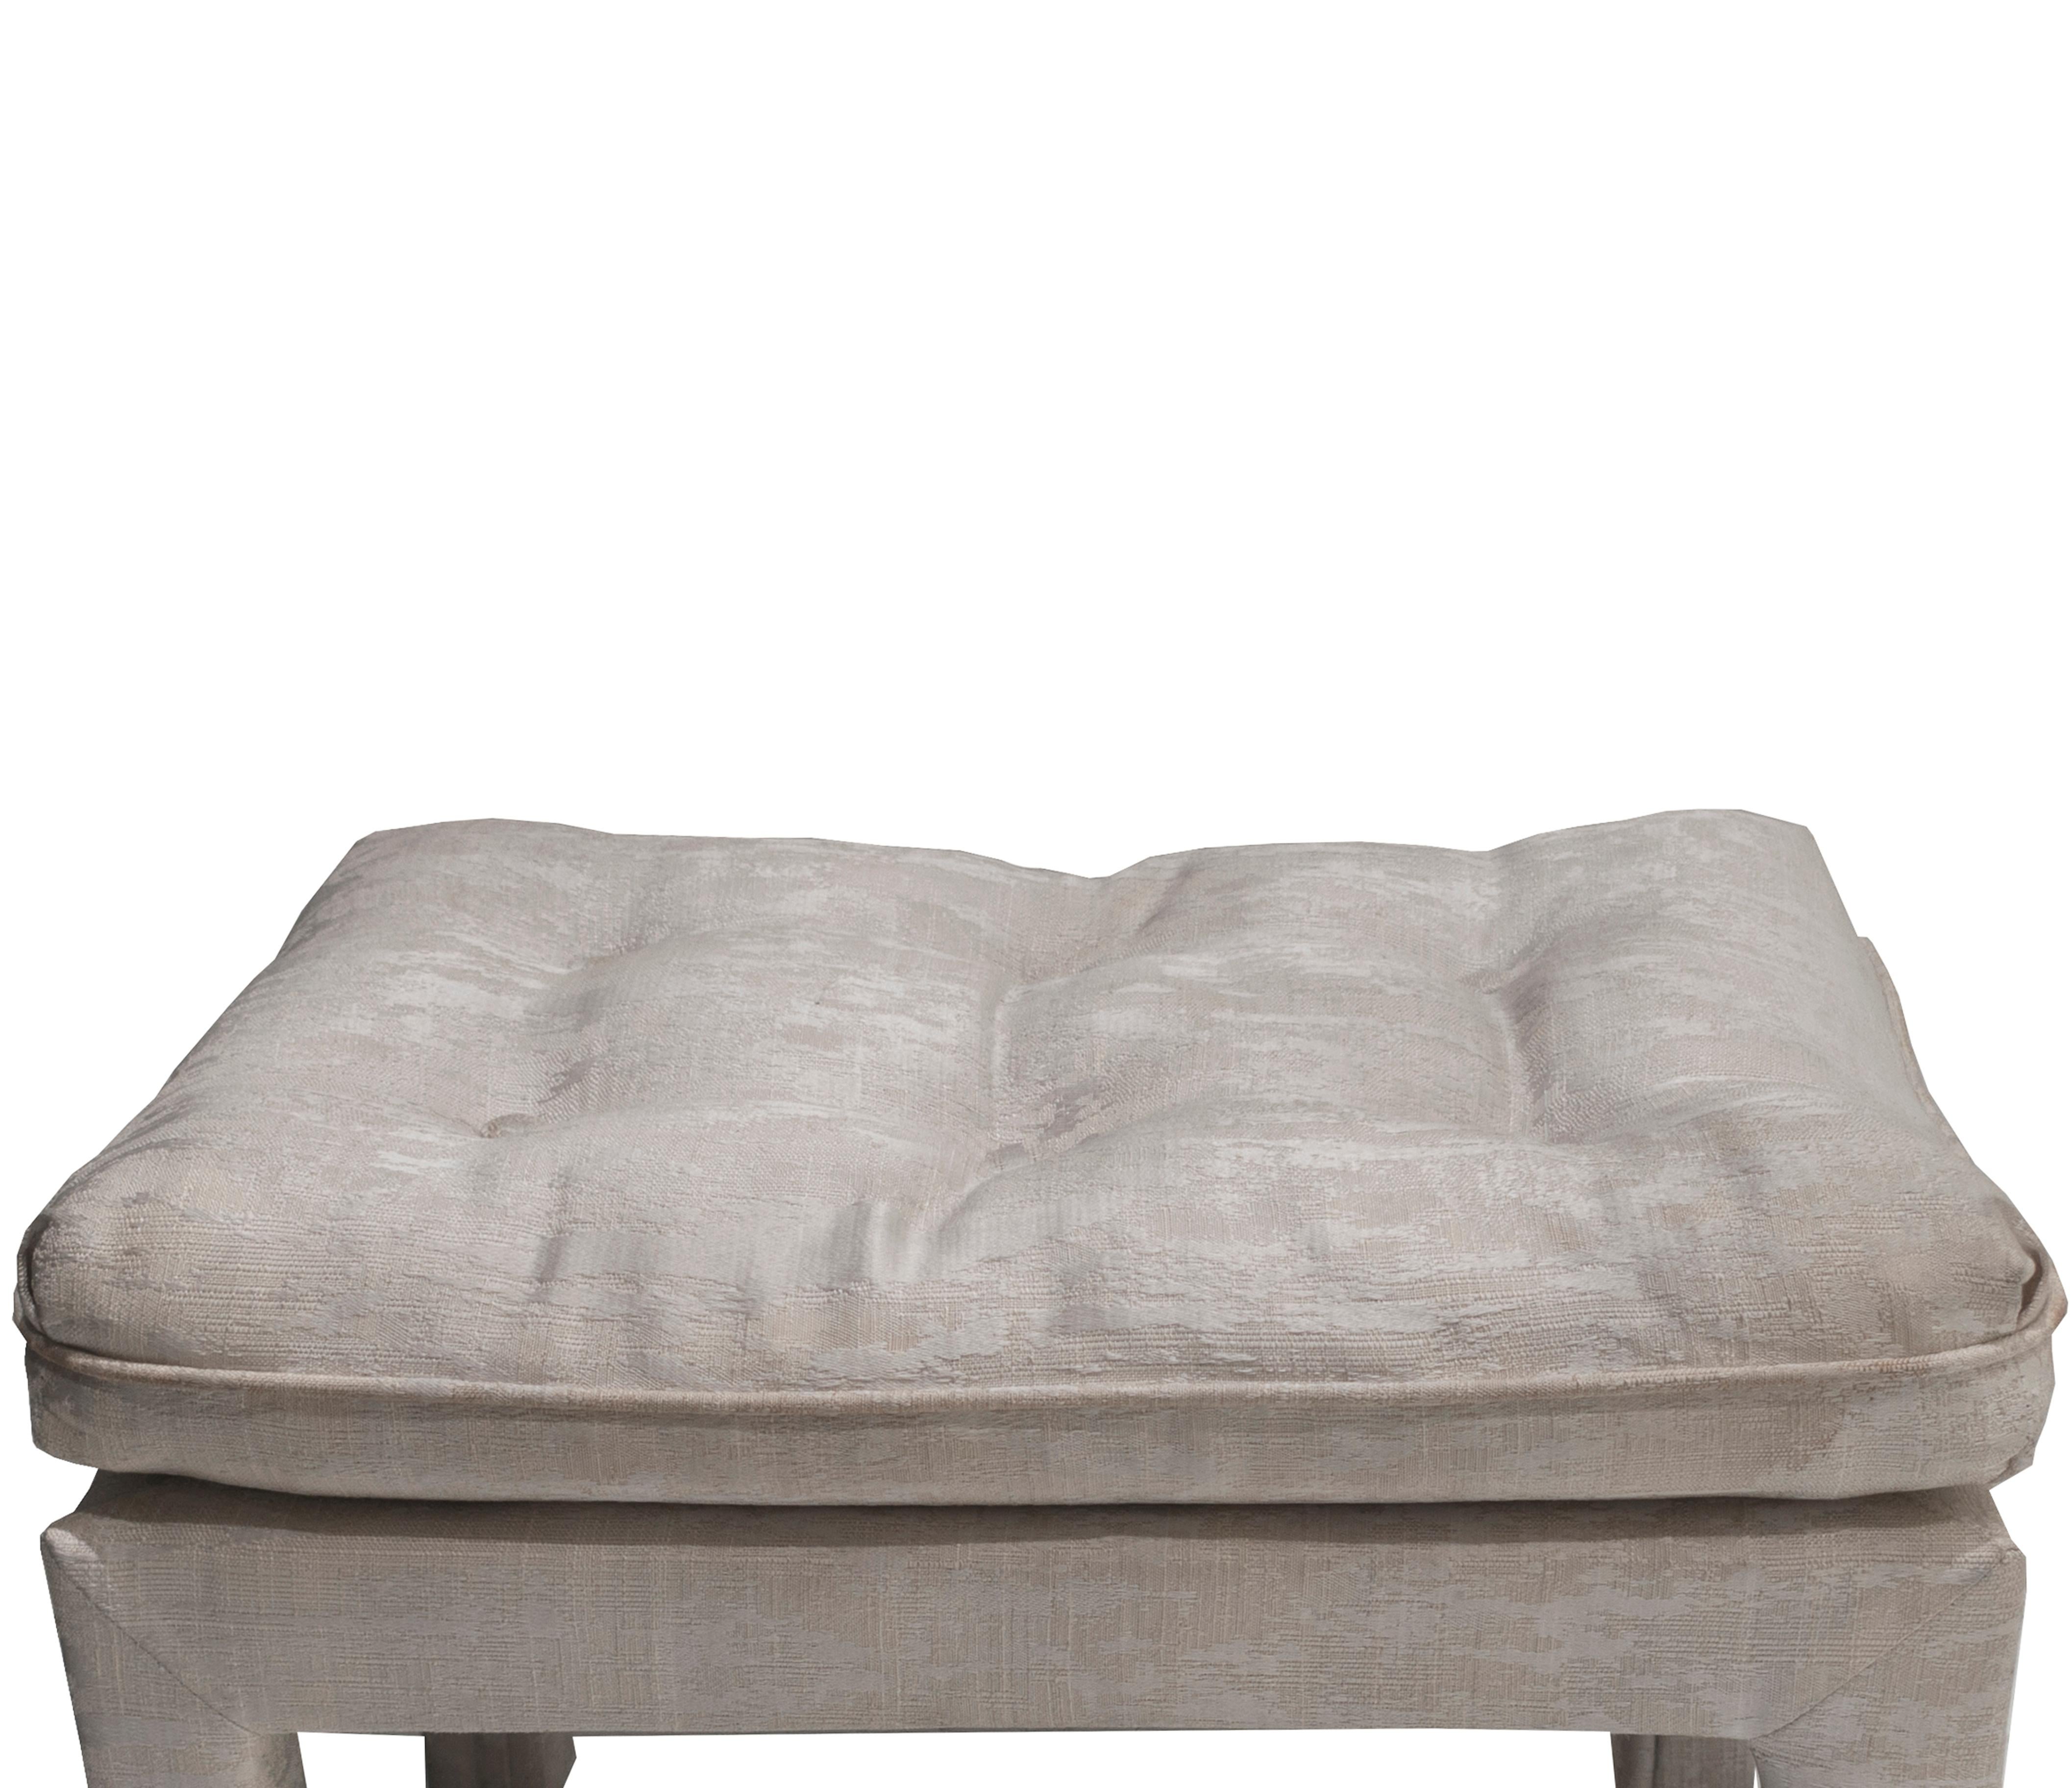 Milo Baughman Parsons Style Pillow Top Ottoman, c. 1960s with button tufted seat. 

